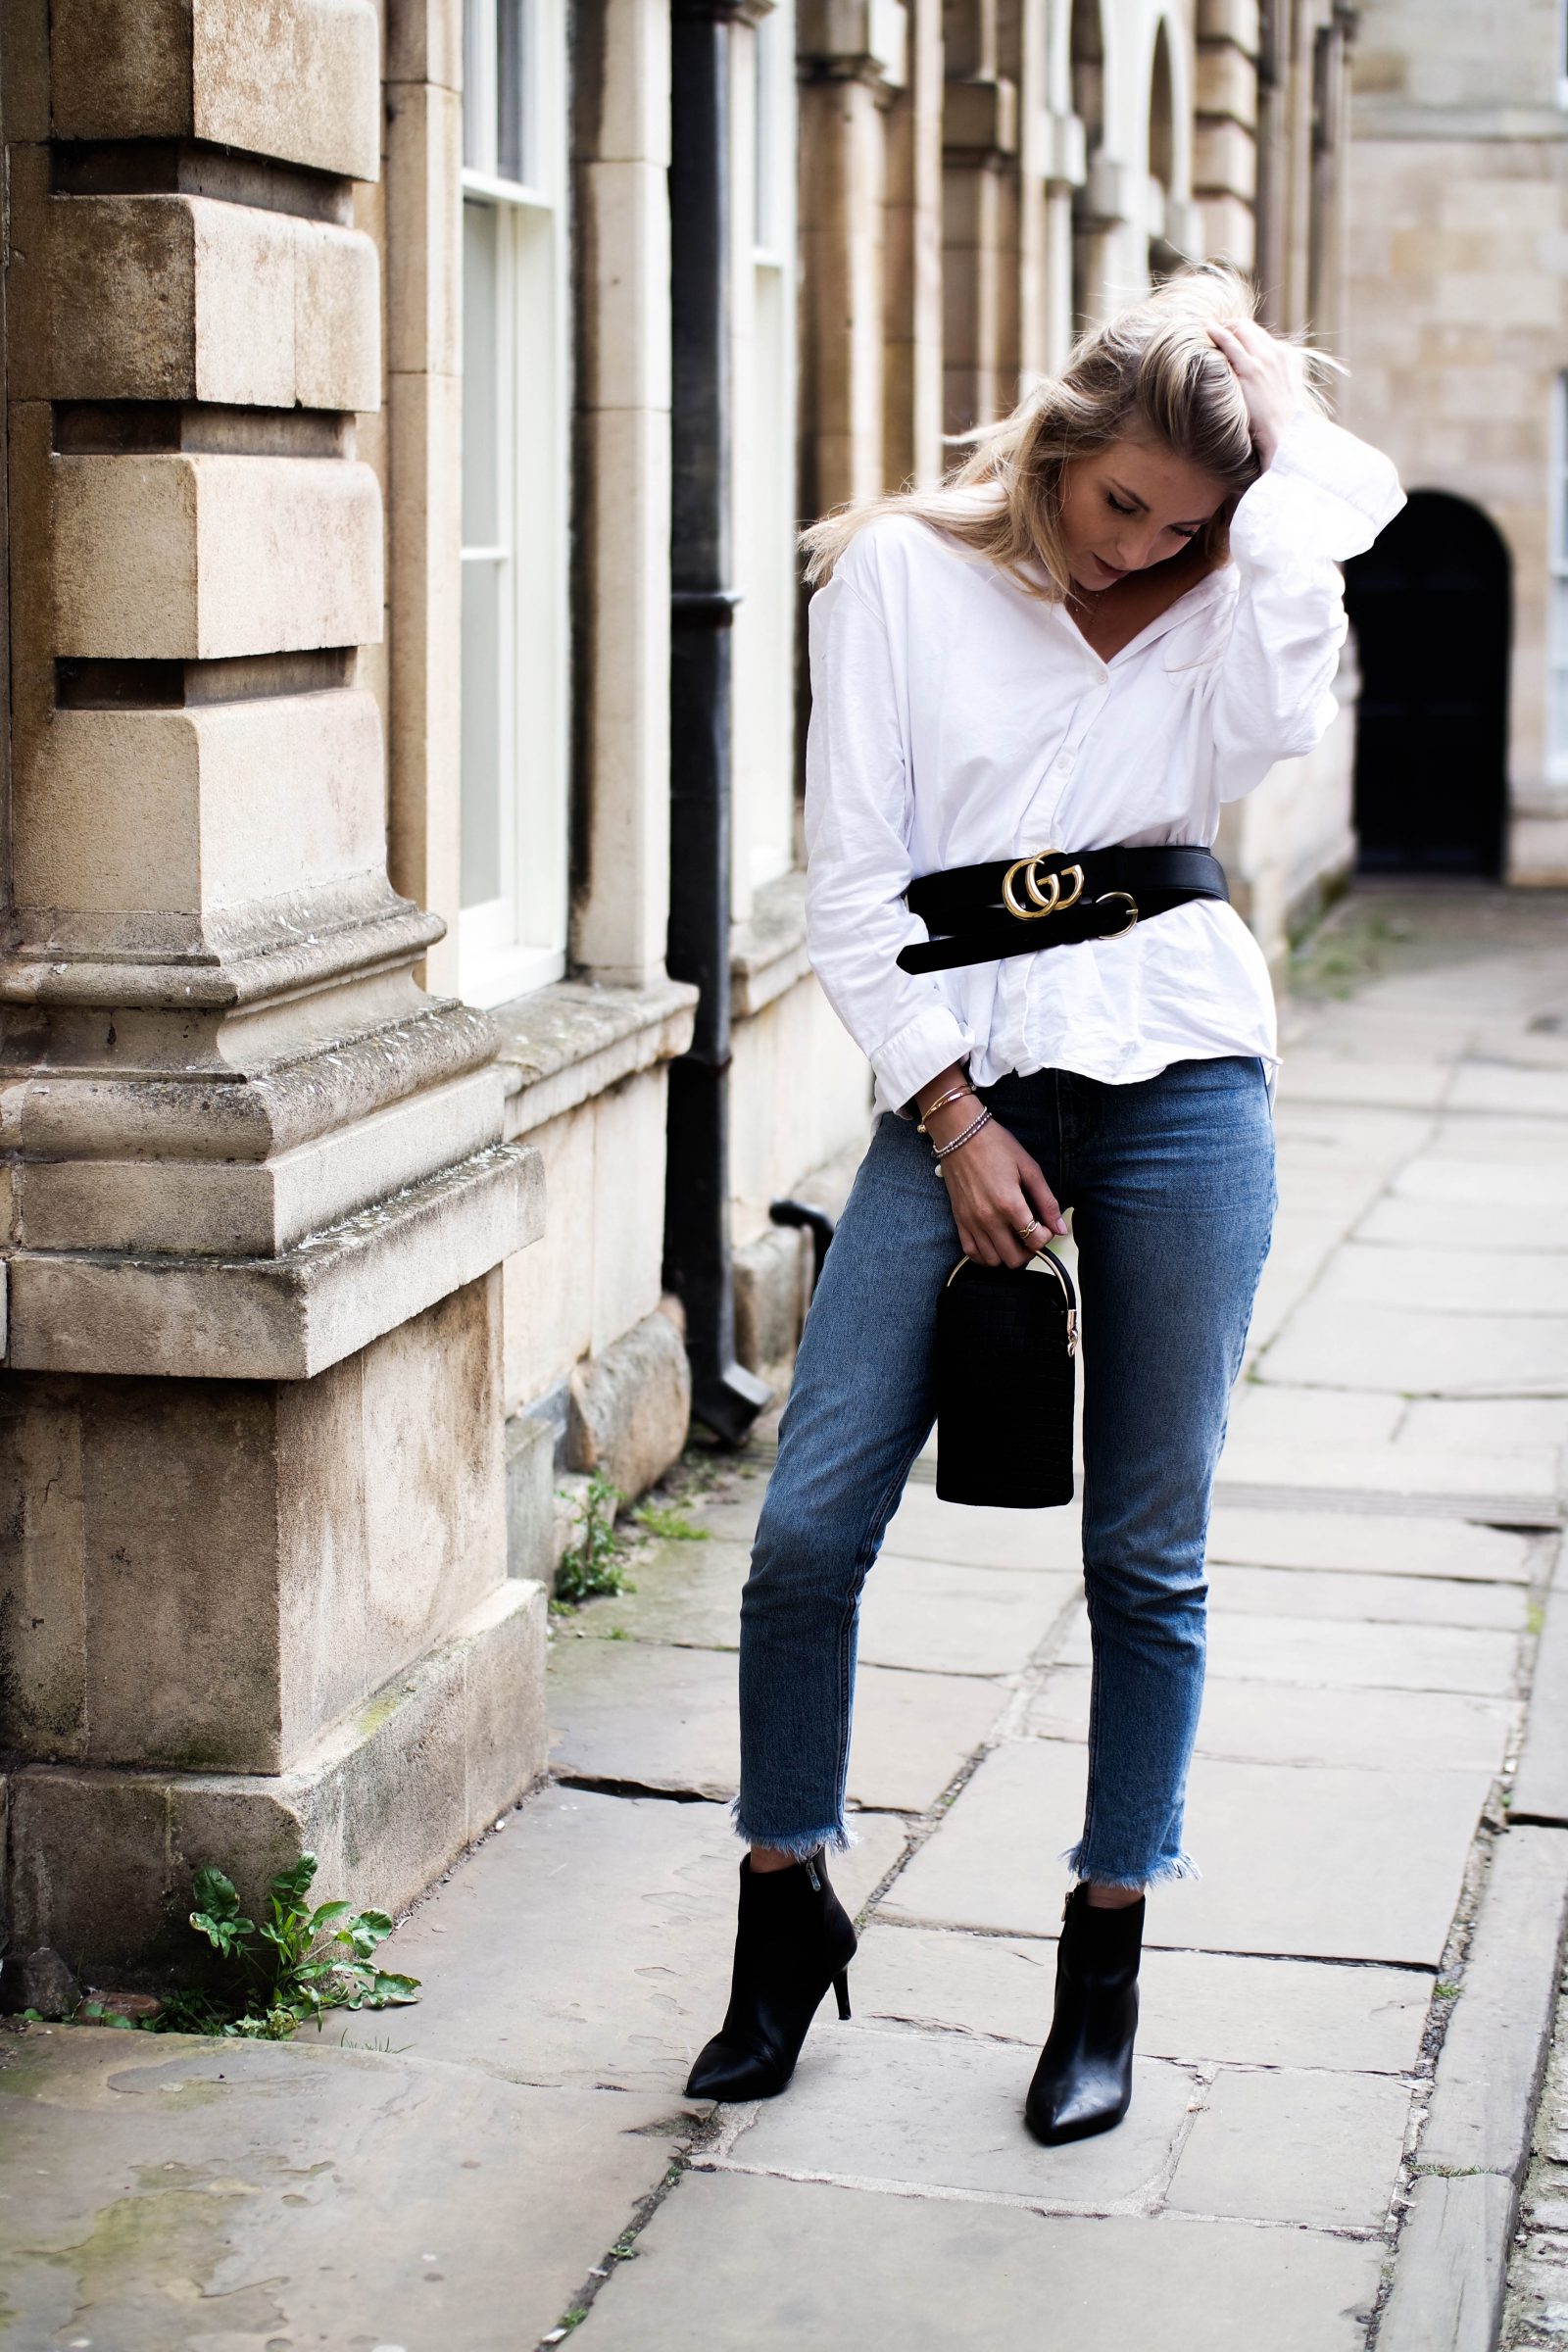 The New Way To Wear Your Statement Belt - Transitional Outfit Inspiration 